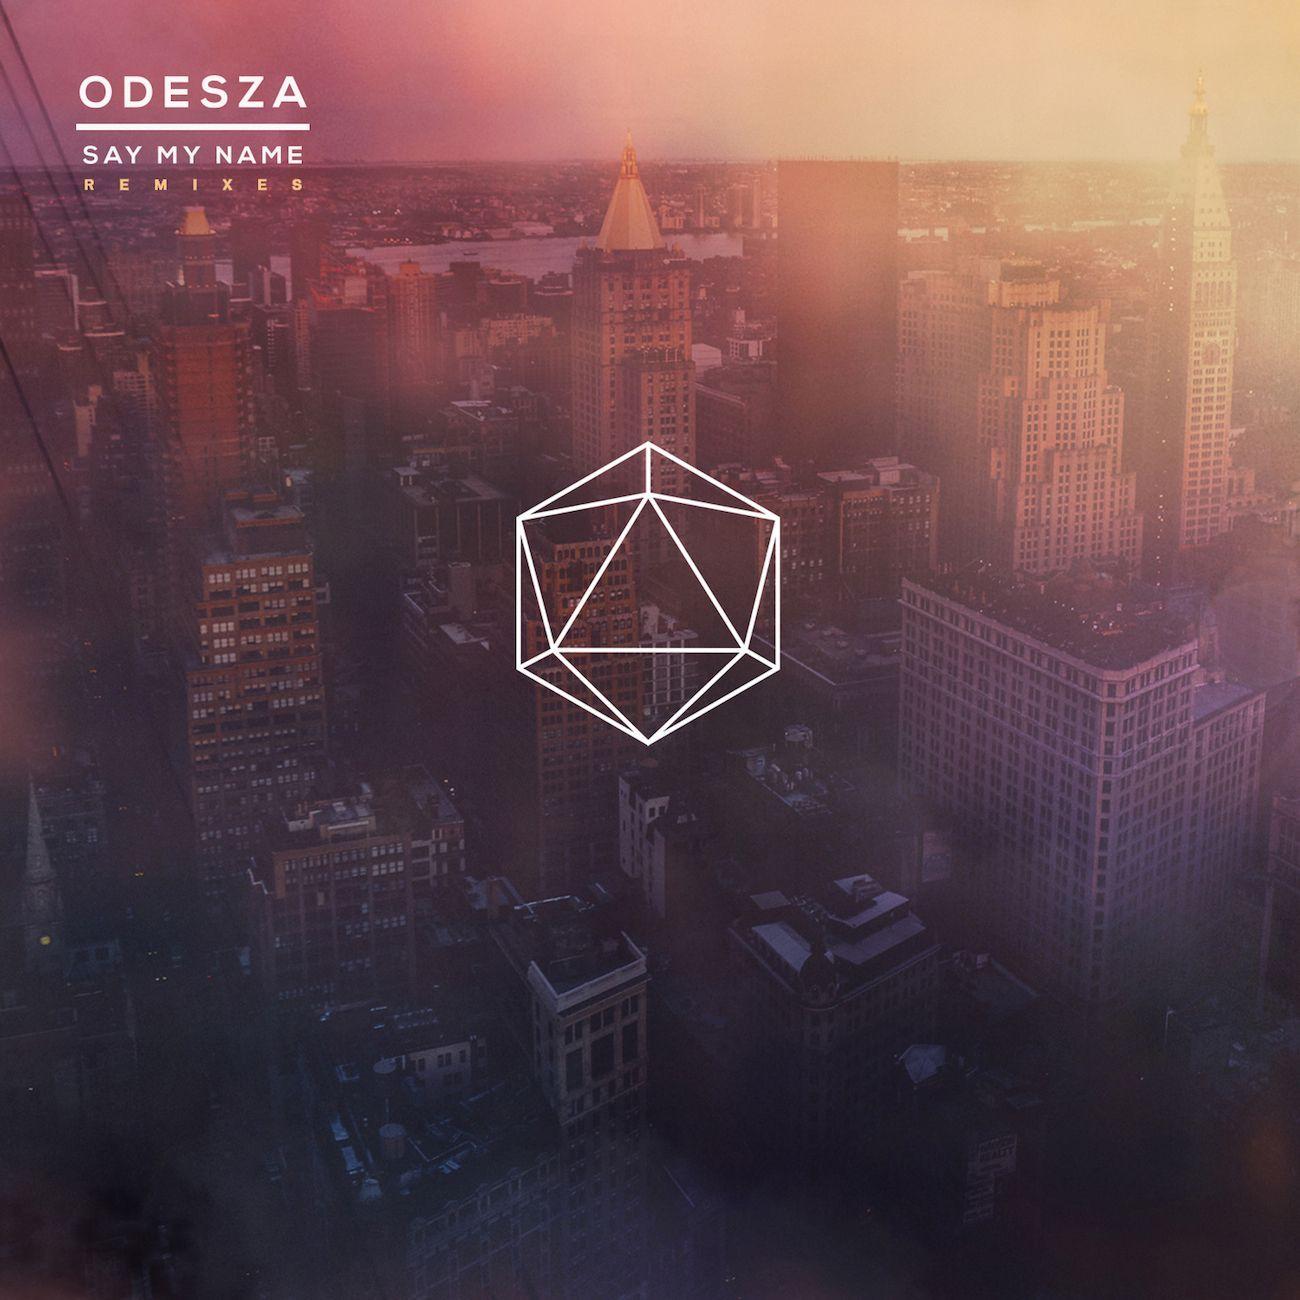 Would someone be willing to make this Odesza logo into a custom